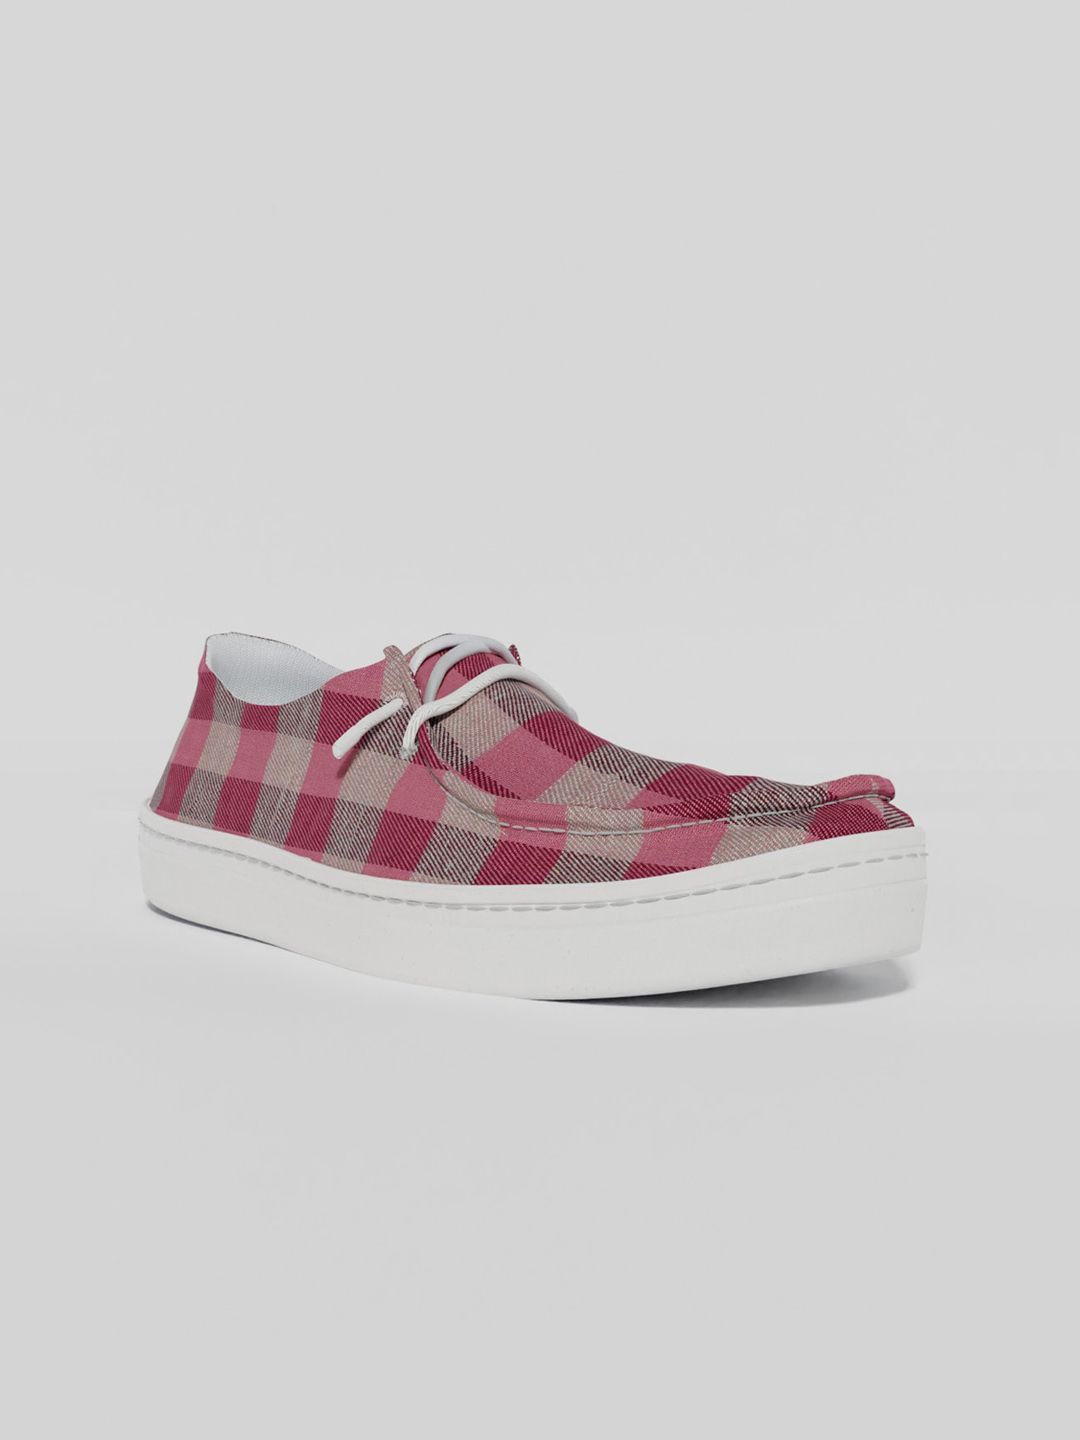 LOKAIT The Sneakers Company Women Pink Striped Slip-On Sneakers Price in India